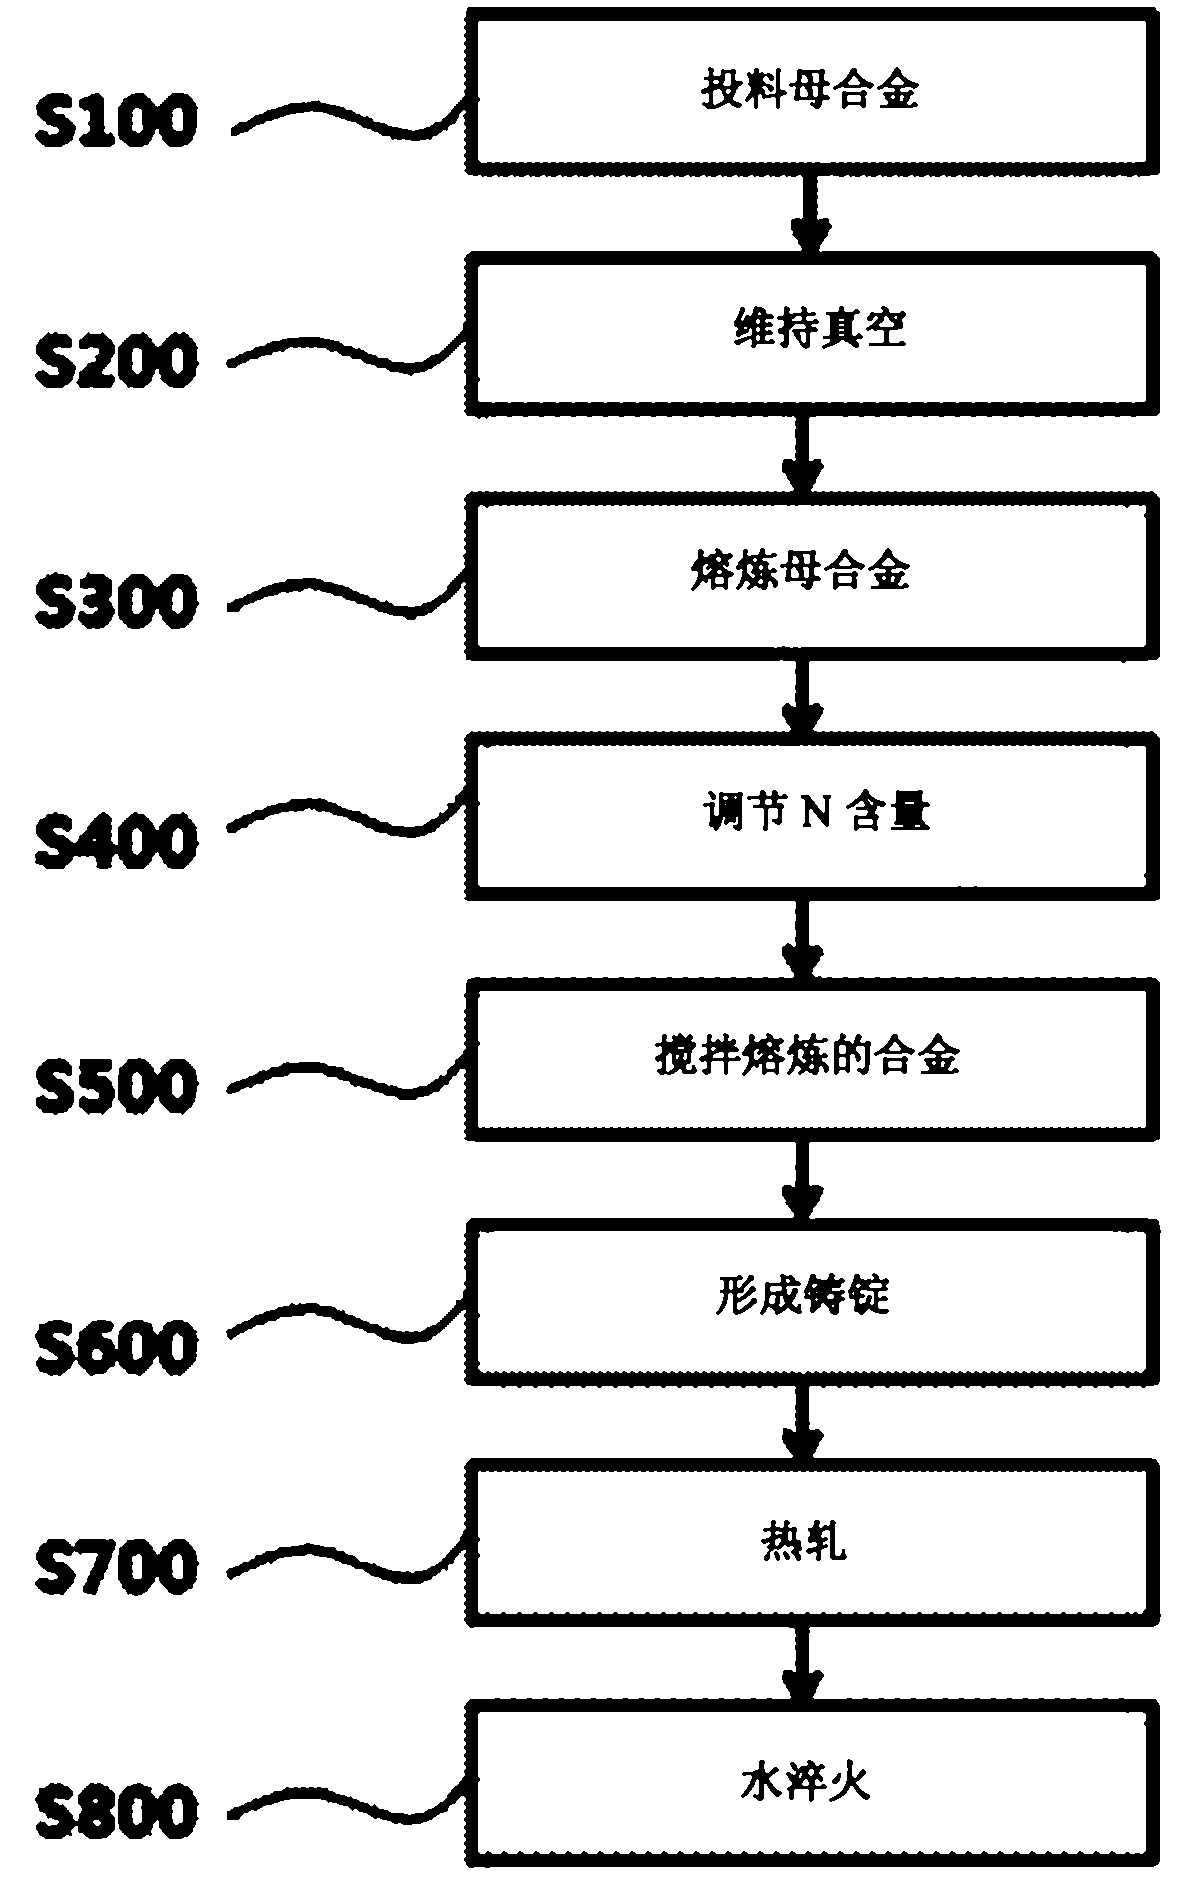 High strength/corrosion-resistant austenitic stainless steel with carbon - nitrogen complex additive, and method for manufacturing same